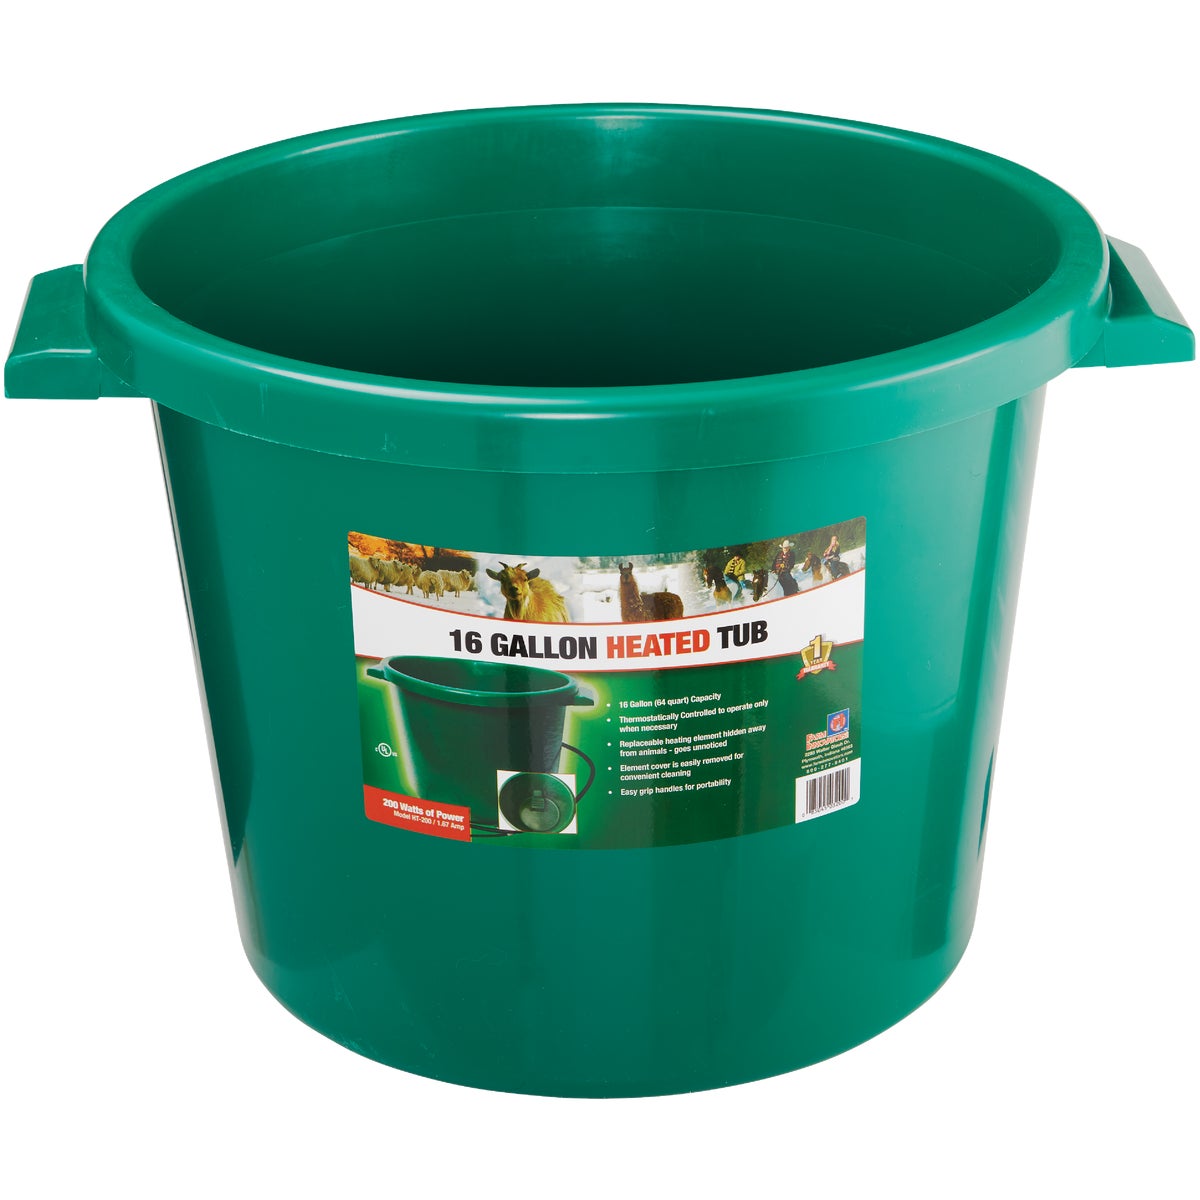 Item 755856, Heated plastic tub which provides ice free water.